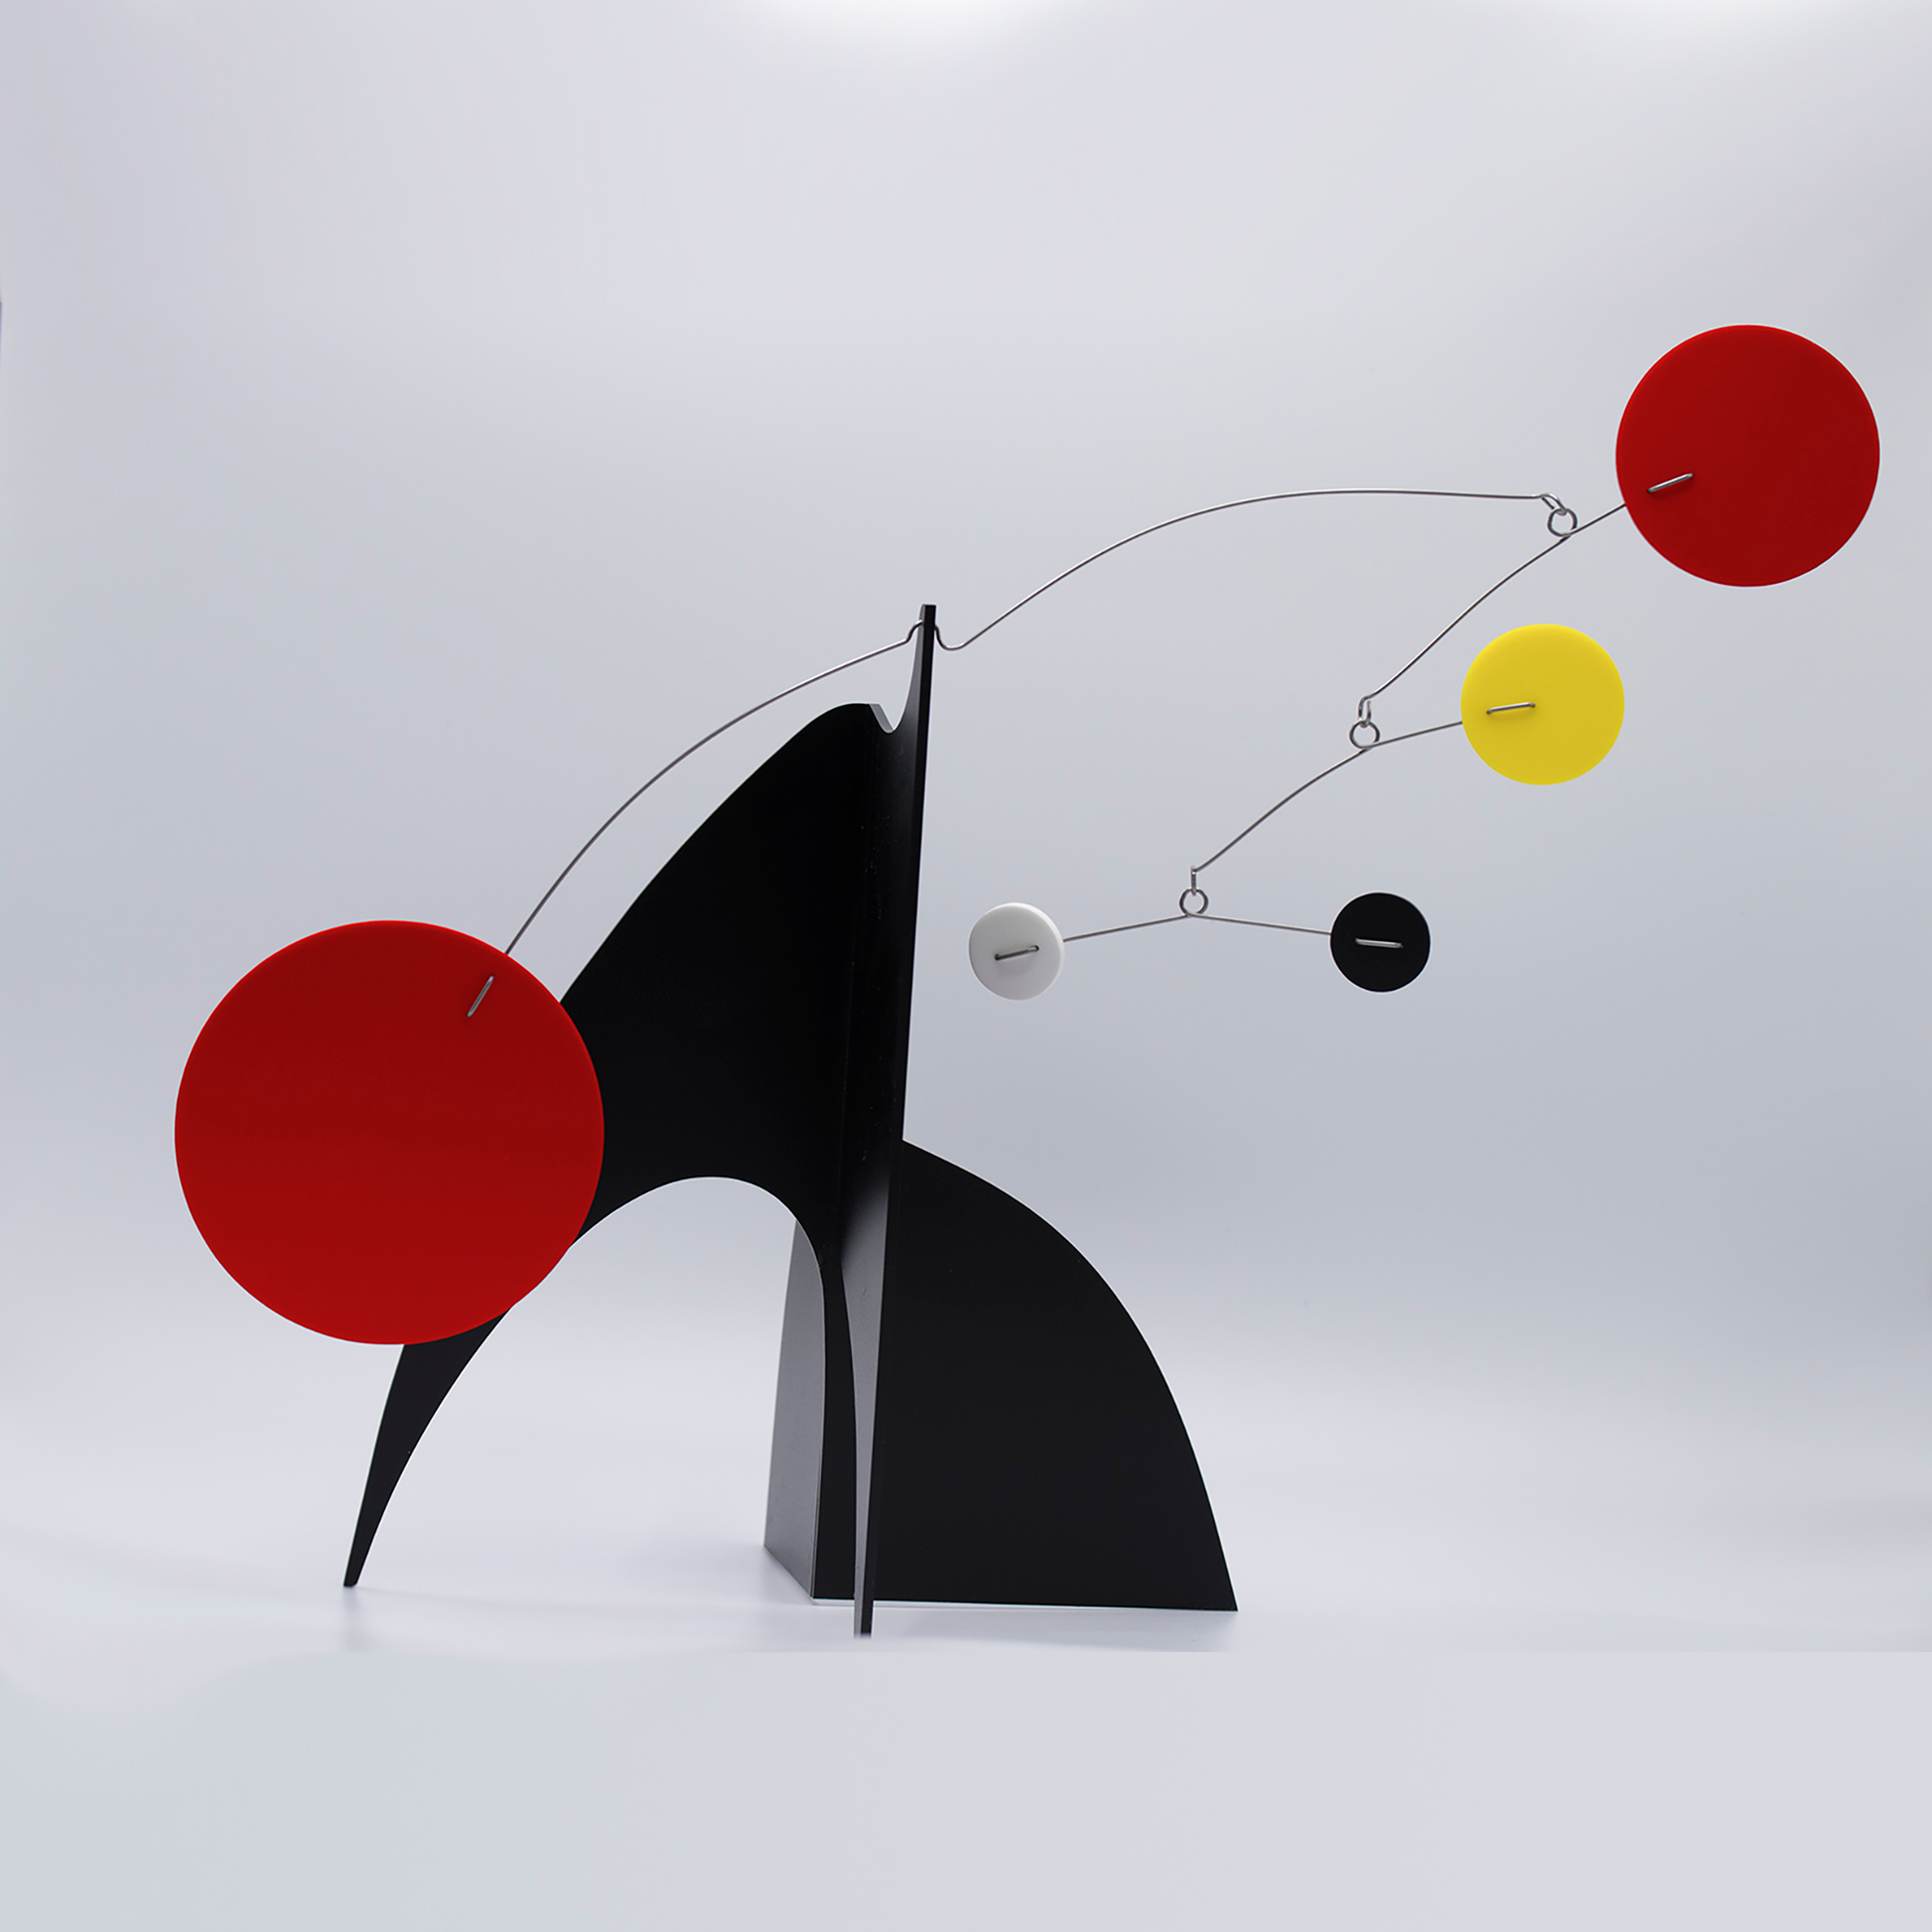 Beautiful Moderne Art Stabile in black, red, yellow, and white - mid century modern inspired abstract modern art - tabletop kinetic art sculpture mobiles hand made with glossy plexiglass acrylic in Los Angeles by Debra Ann of AtomicMobiles.com